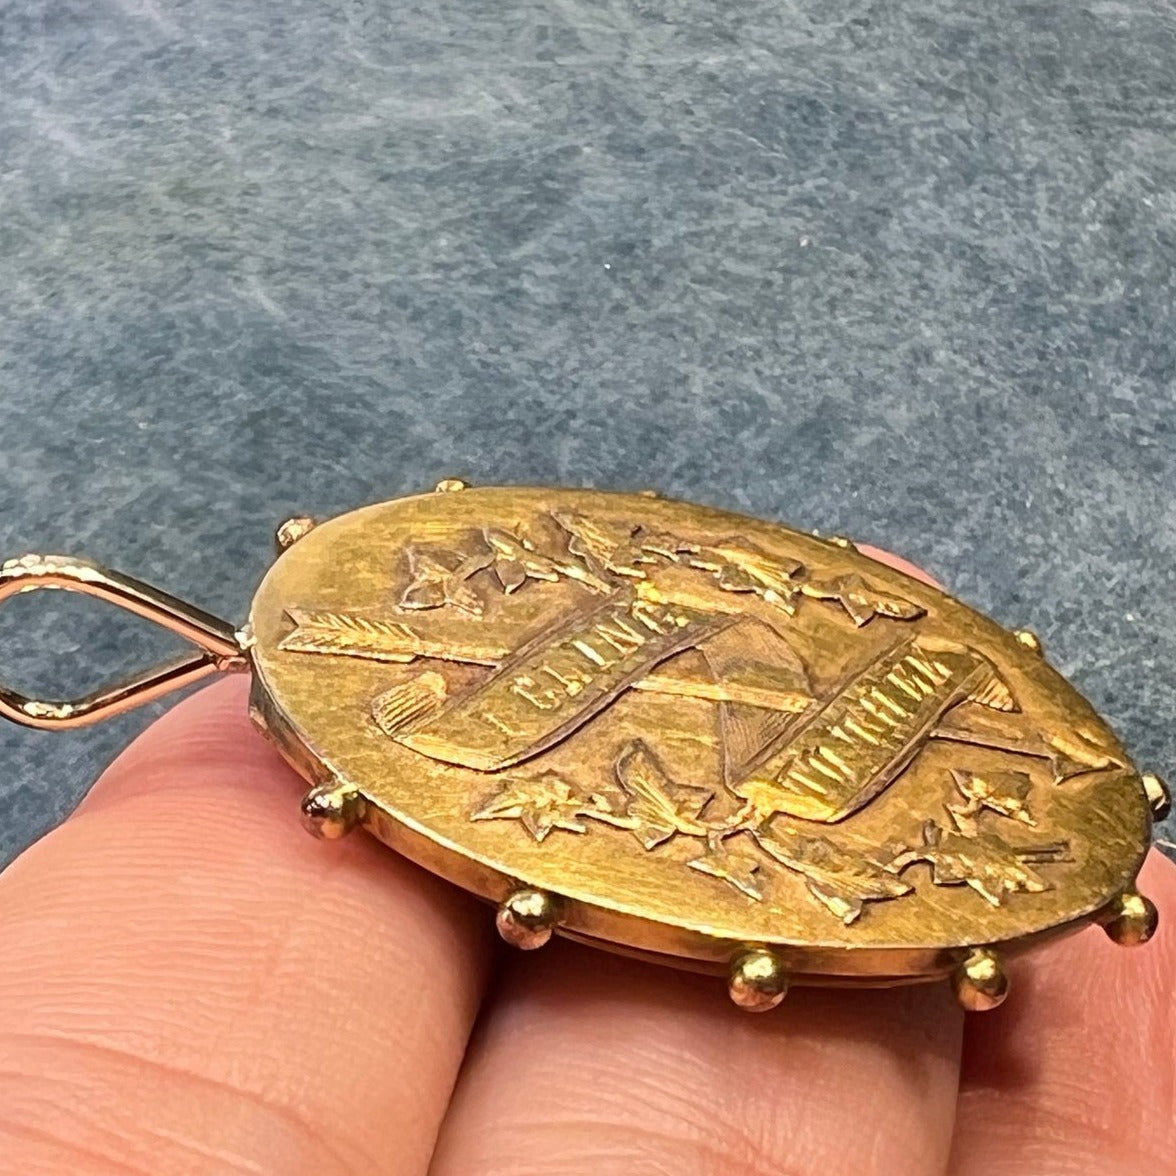 9k -10k Gold "I Cling to Thee" Victorian Mourning Pendant. 1.5"